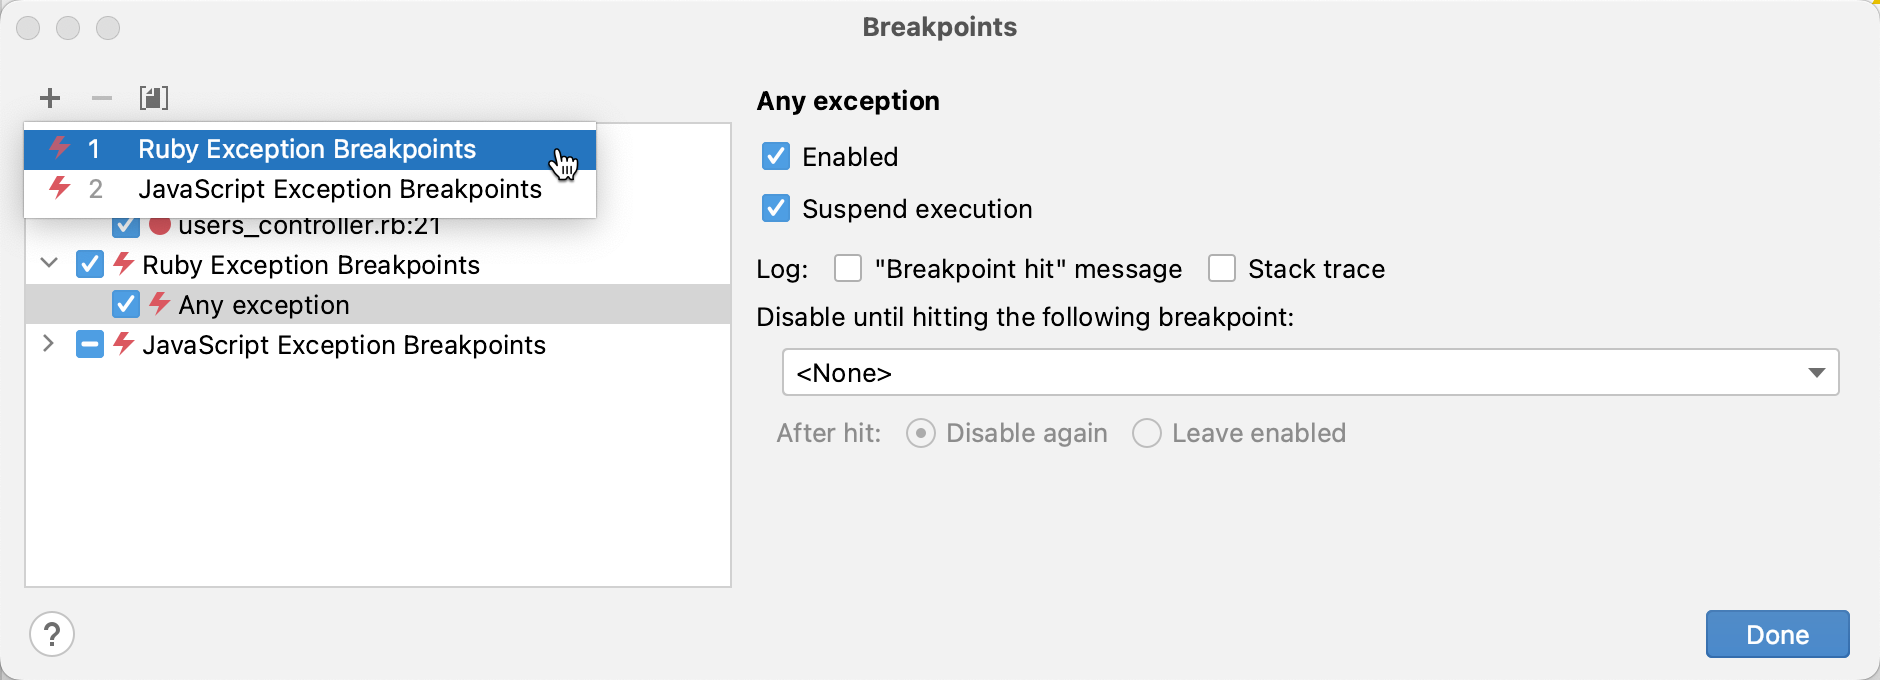 Creating an exception breakpoint